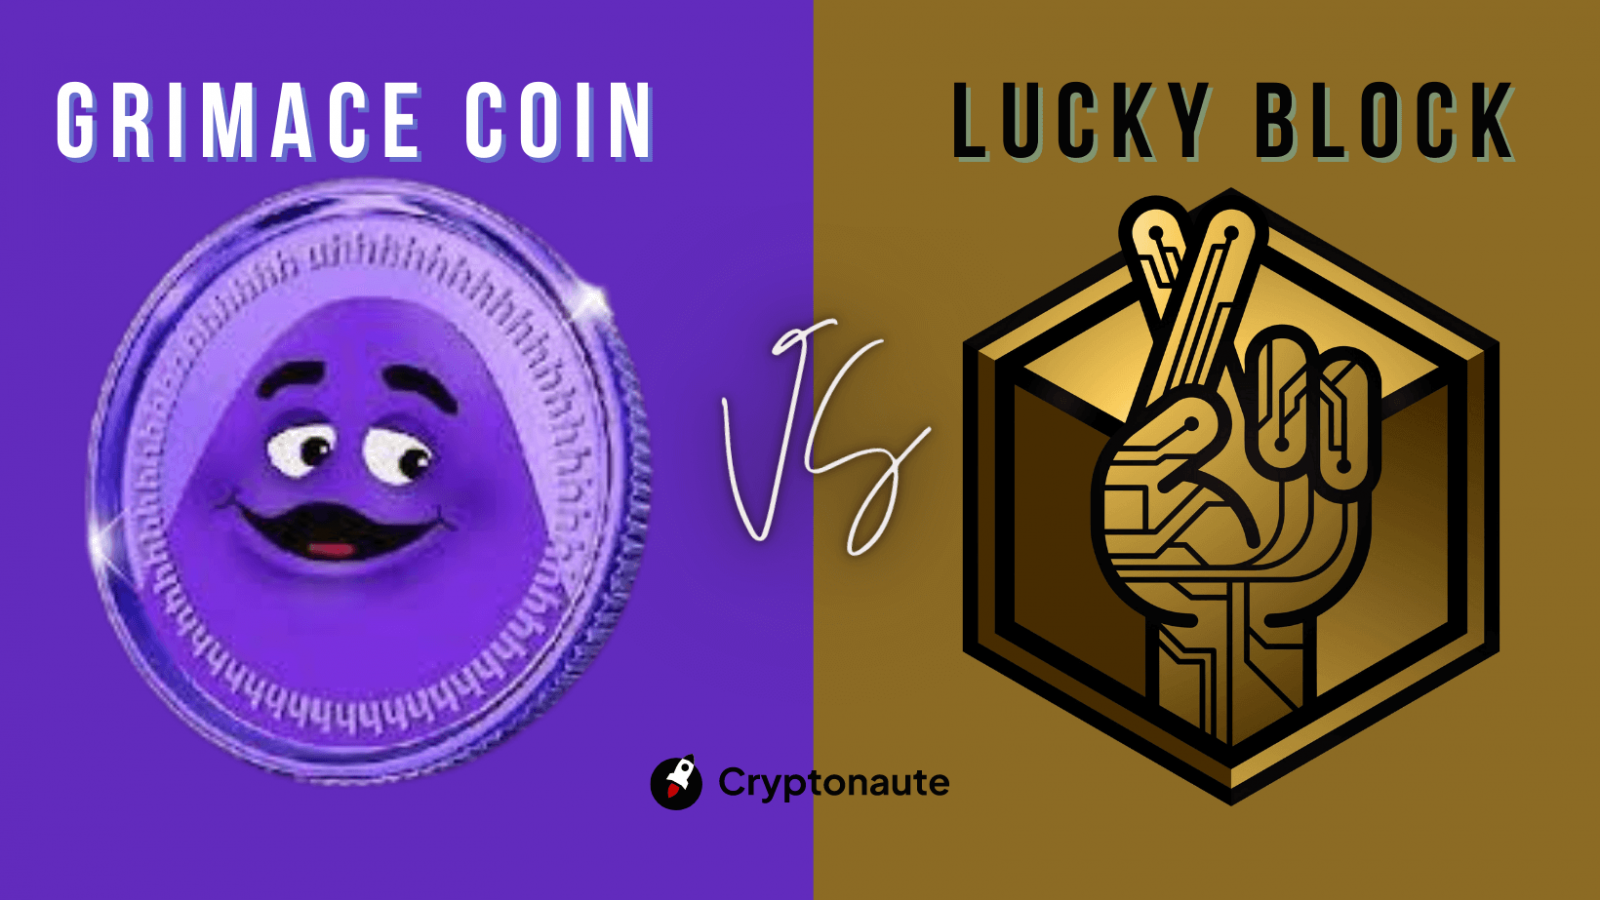 where to buy grimace crypto